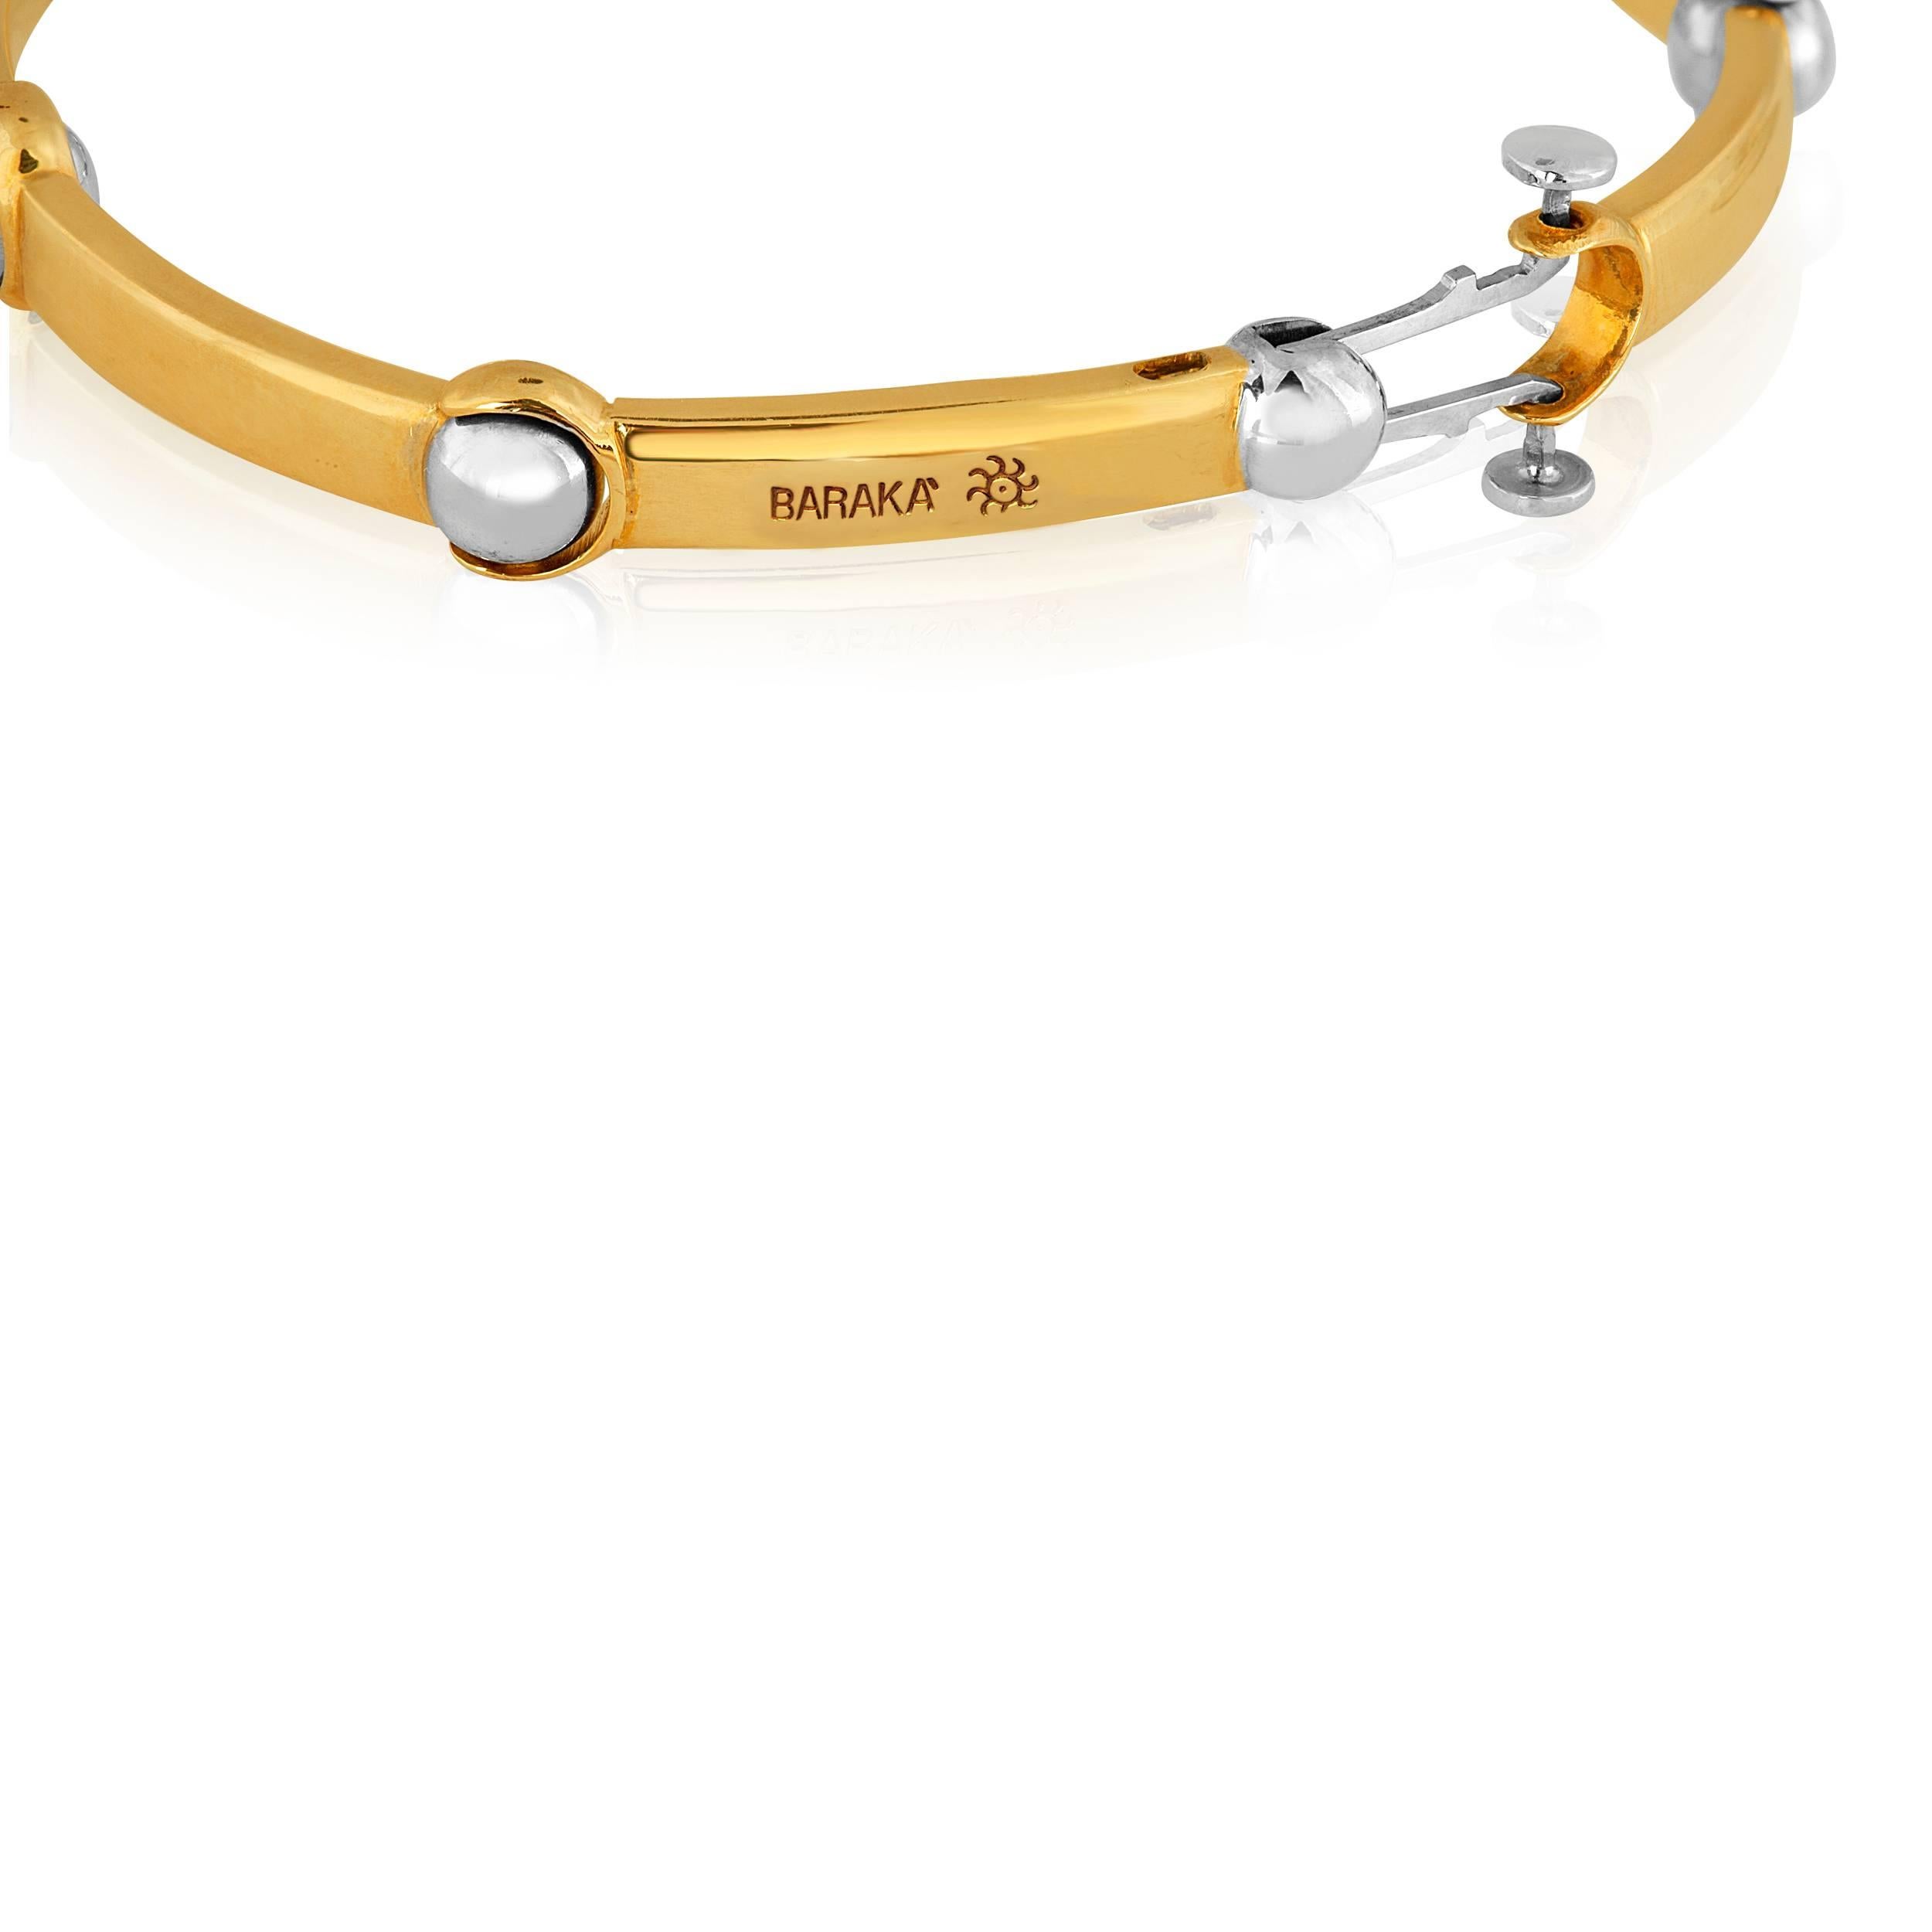 Beautiful Two-Tone BARAKA Bracelet made in ITALY.
The bracelet is Yellow & White 14K Gold.
It measures 7.25